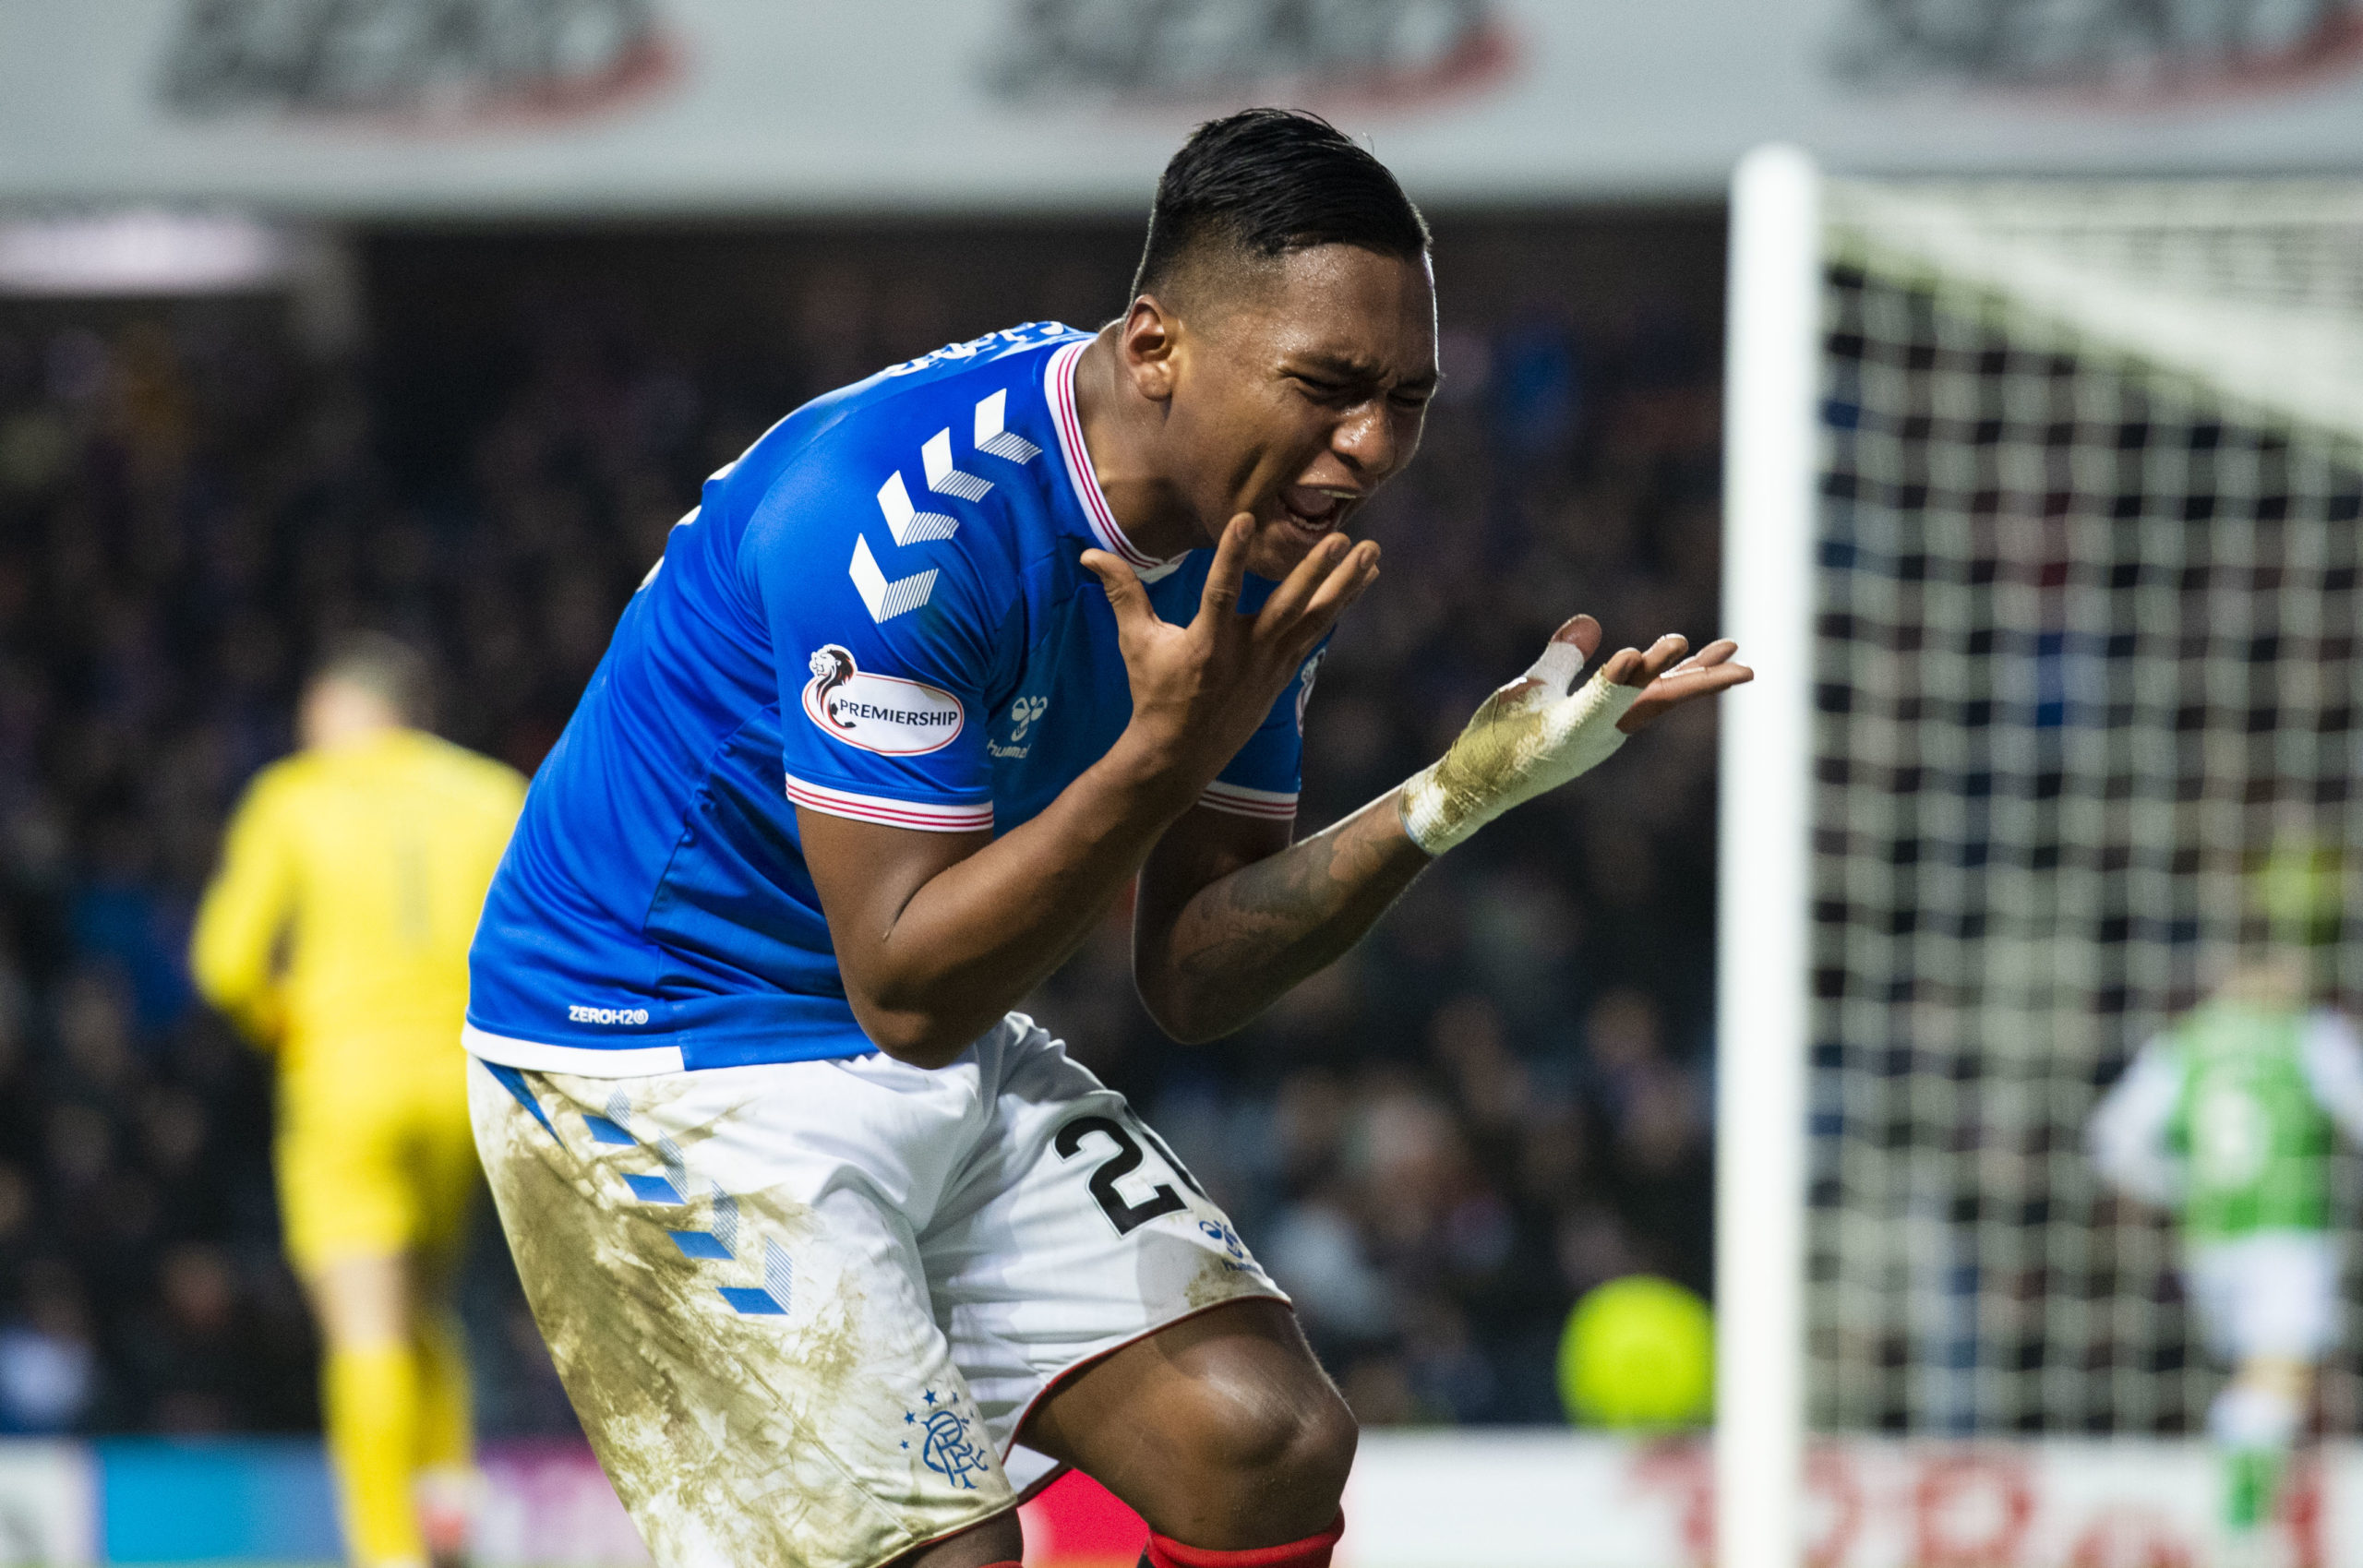 Alfredo Morelos has been having a frustrating time, witness his reaction to a chance going begging against Hibs in midweek